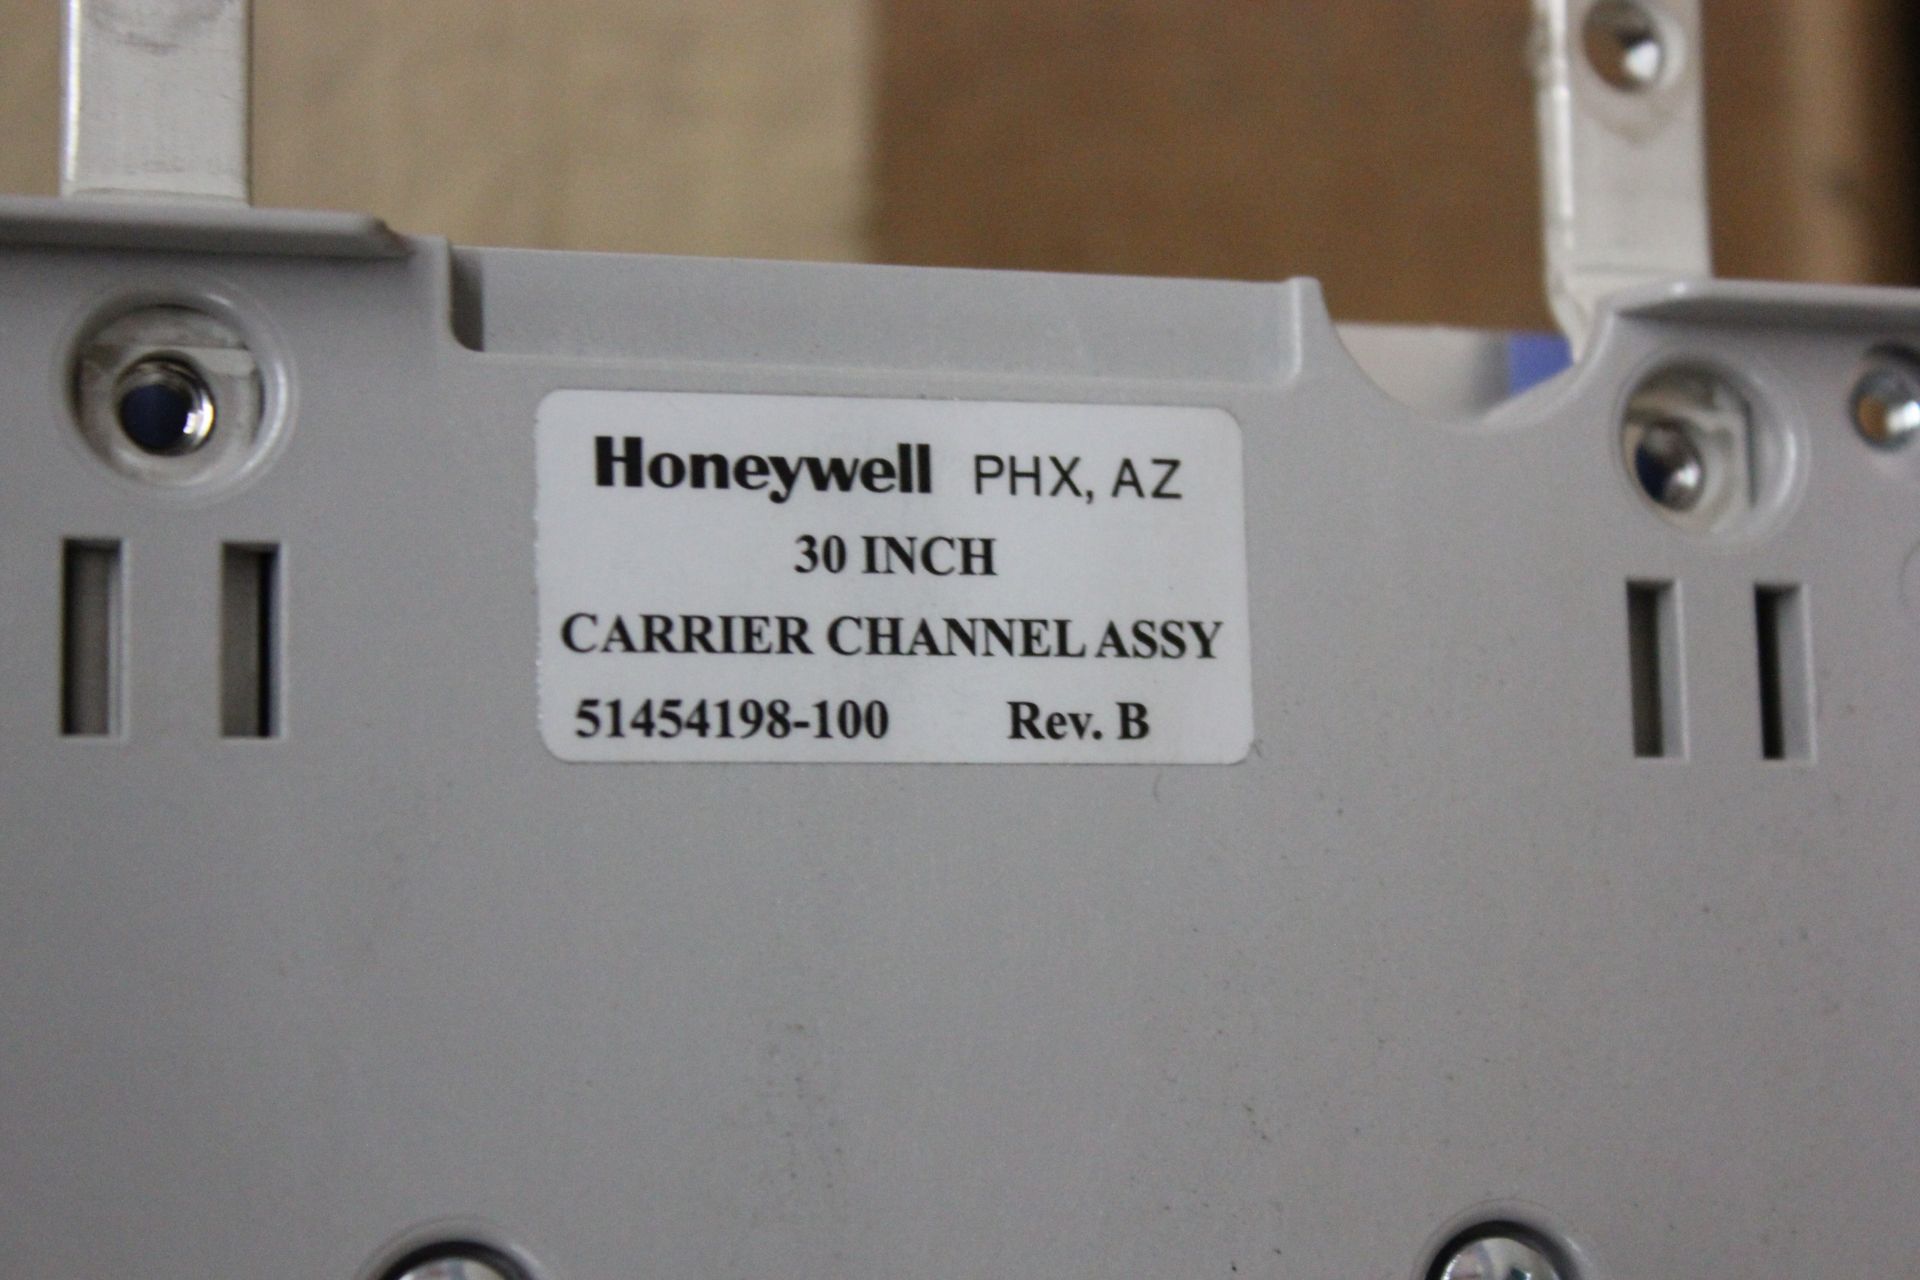 NEW HONEYWELL 30" CARRIER CHANNEL ASSY - Image 6 of 6